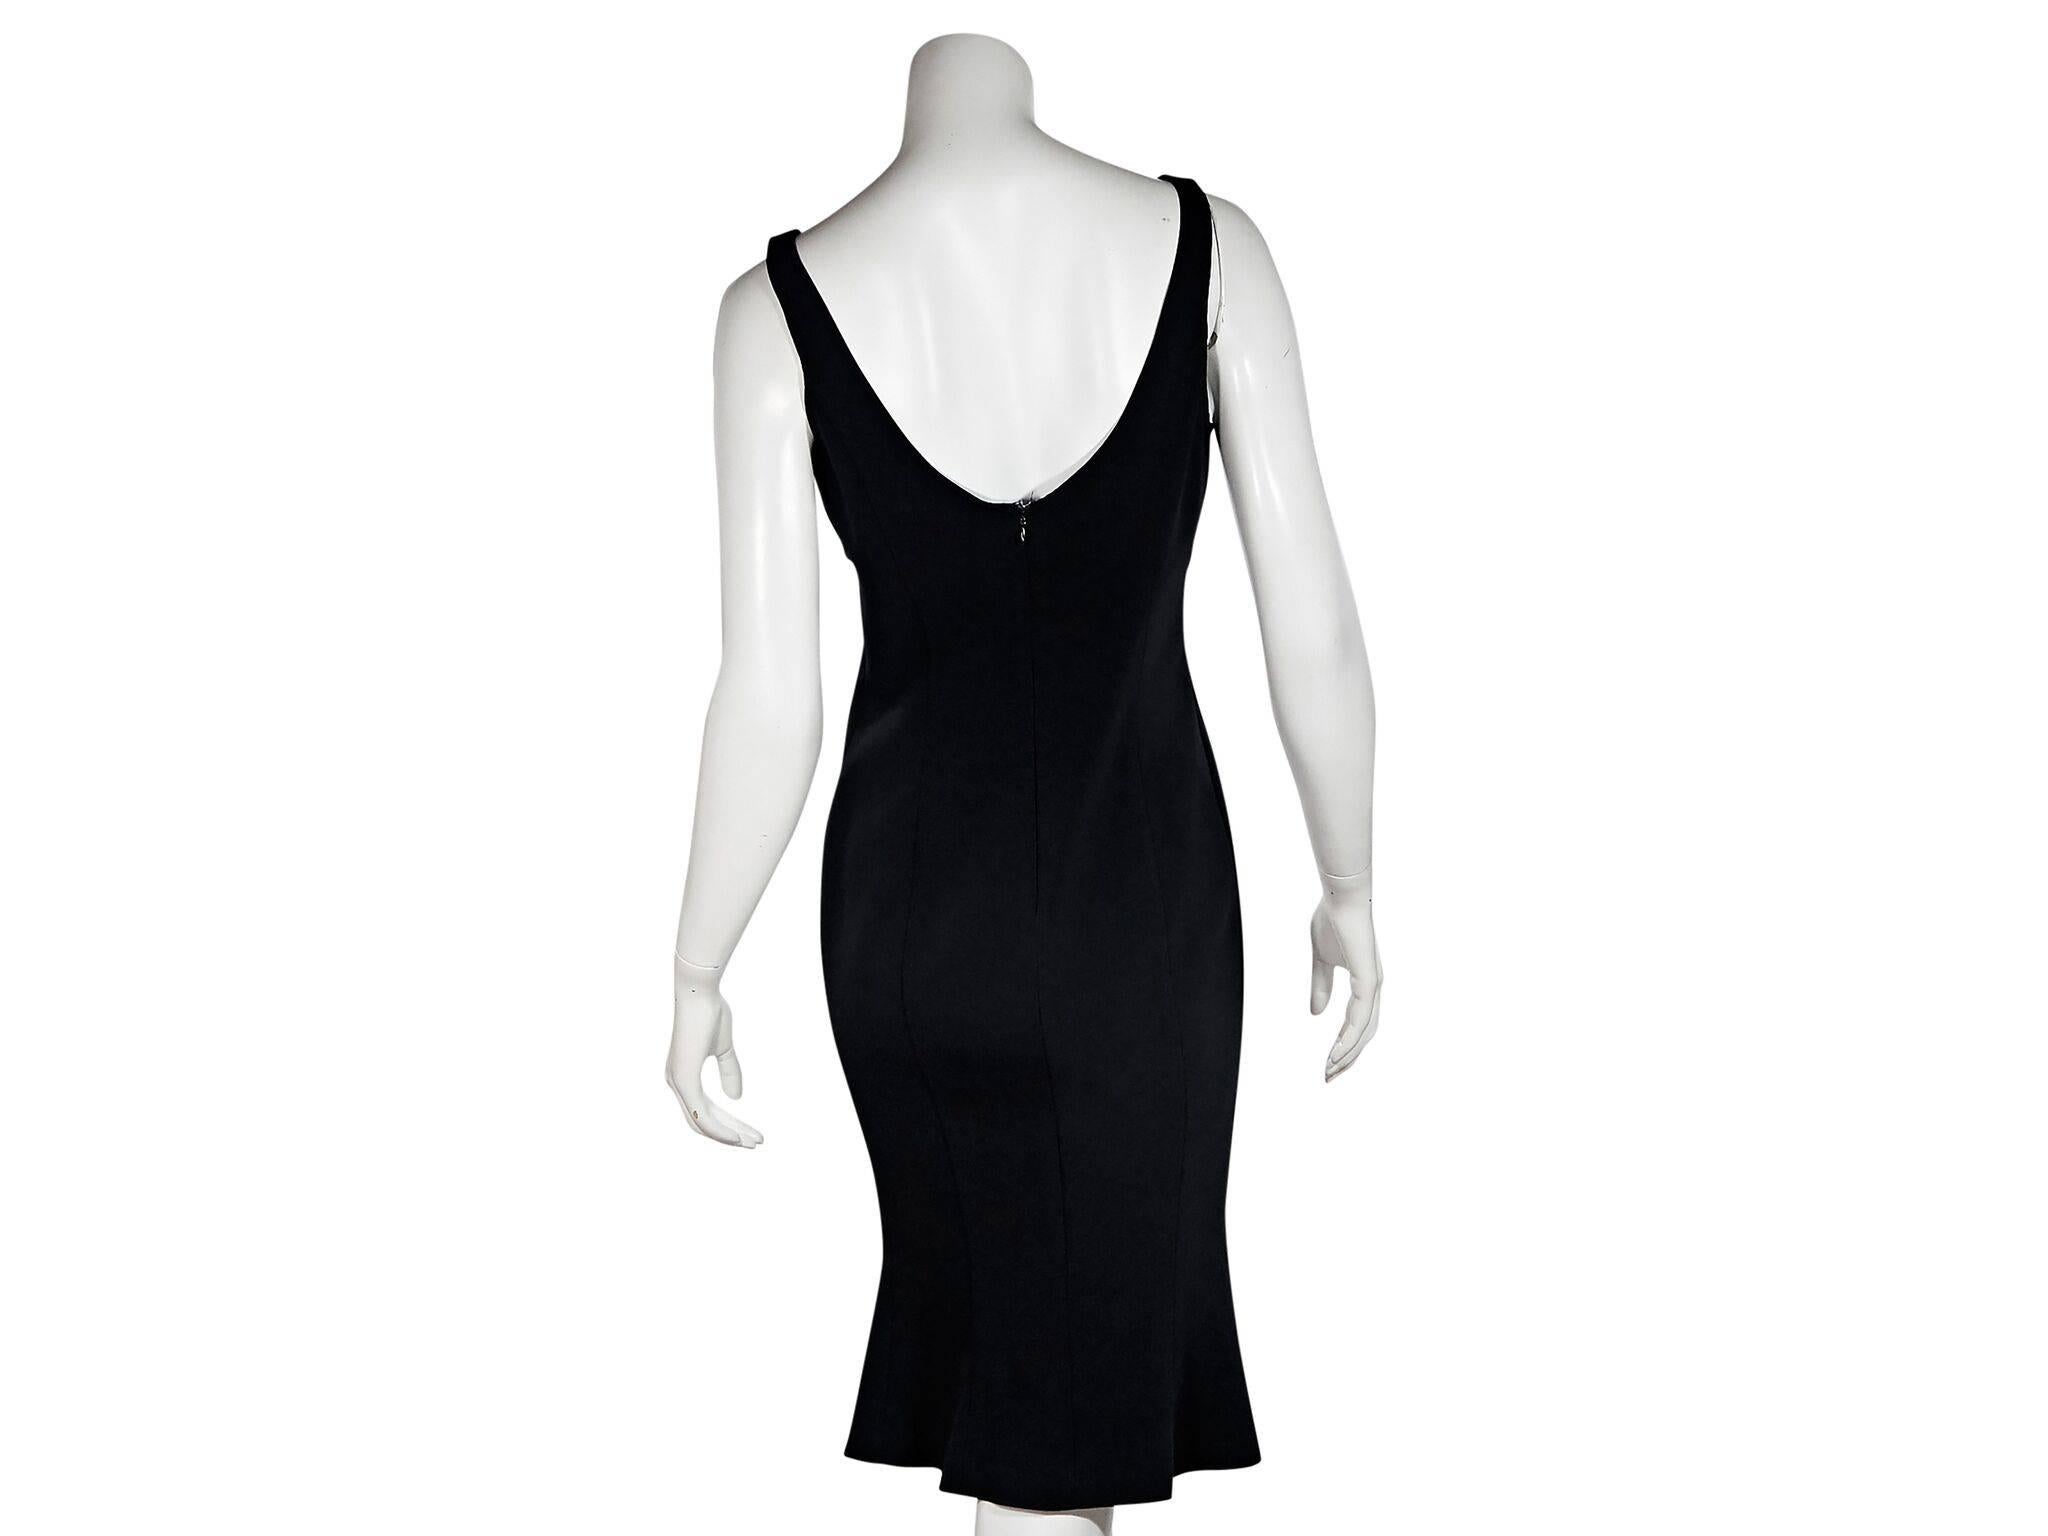 Product details:  Black sheath dress by Versace Jeans Couture.  Sleeveless.  Scoopback.  Concealed back zip closure.  36